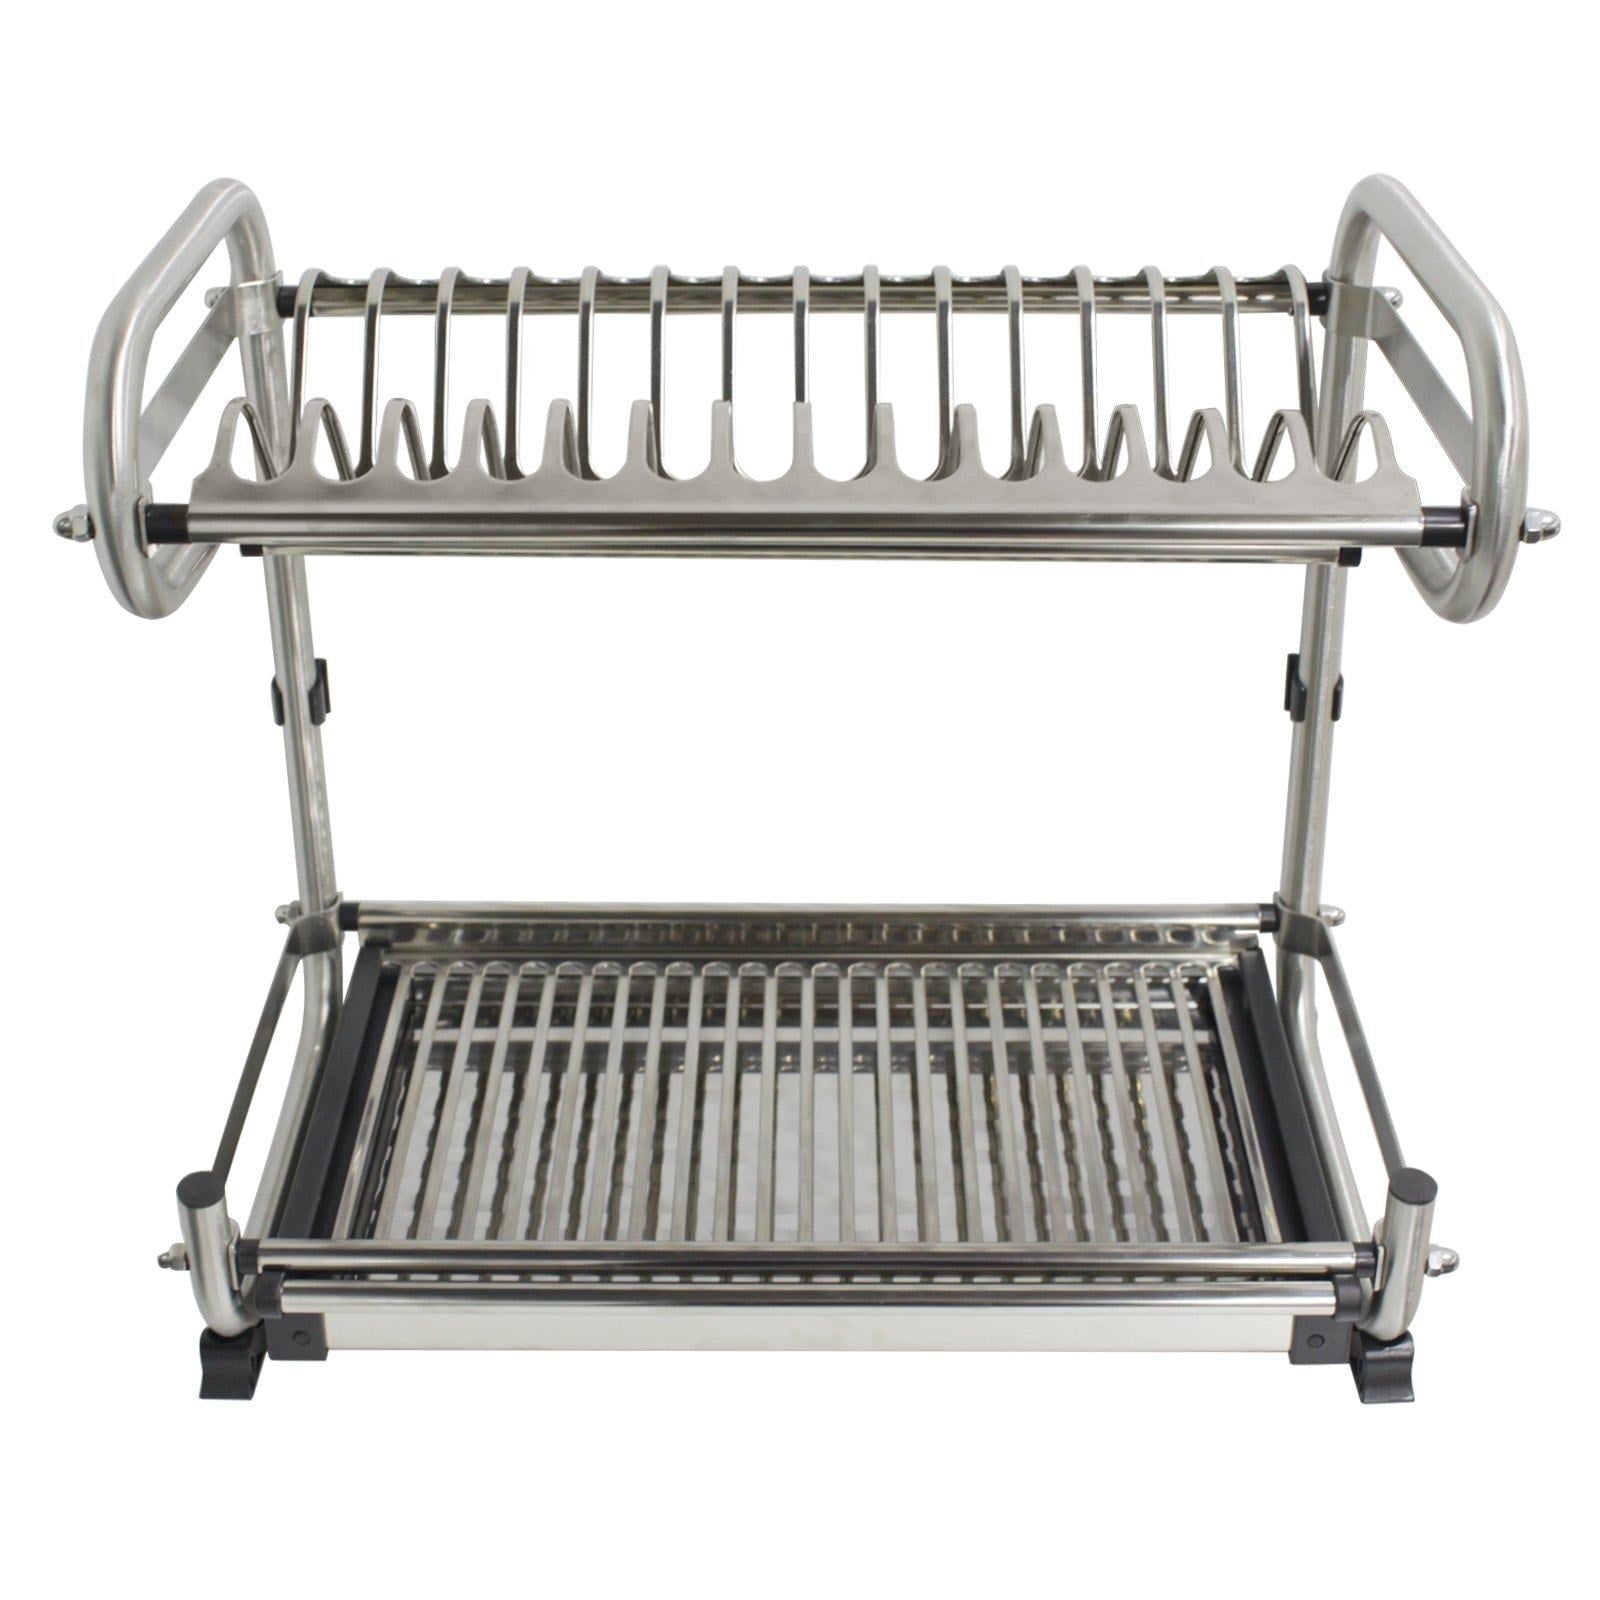 Related probrico dish rack 2 tier 304 stainless steel dry shelf kitchen dishes bowls holder tidy stacking shelf 23 6 inch width